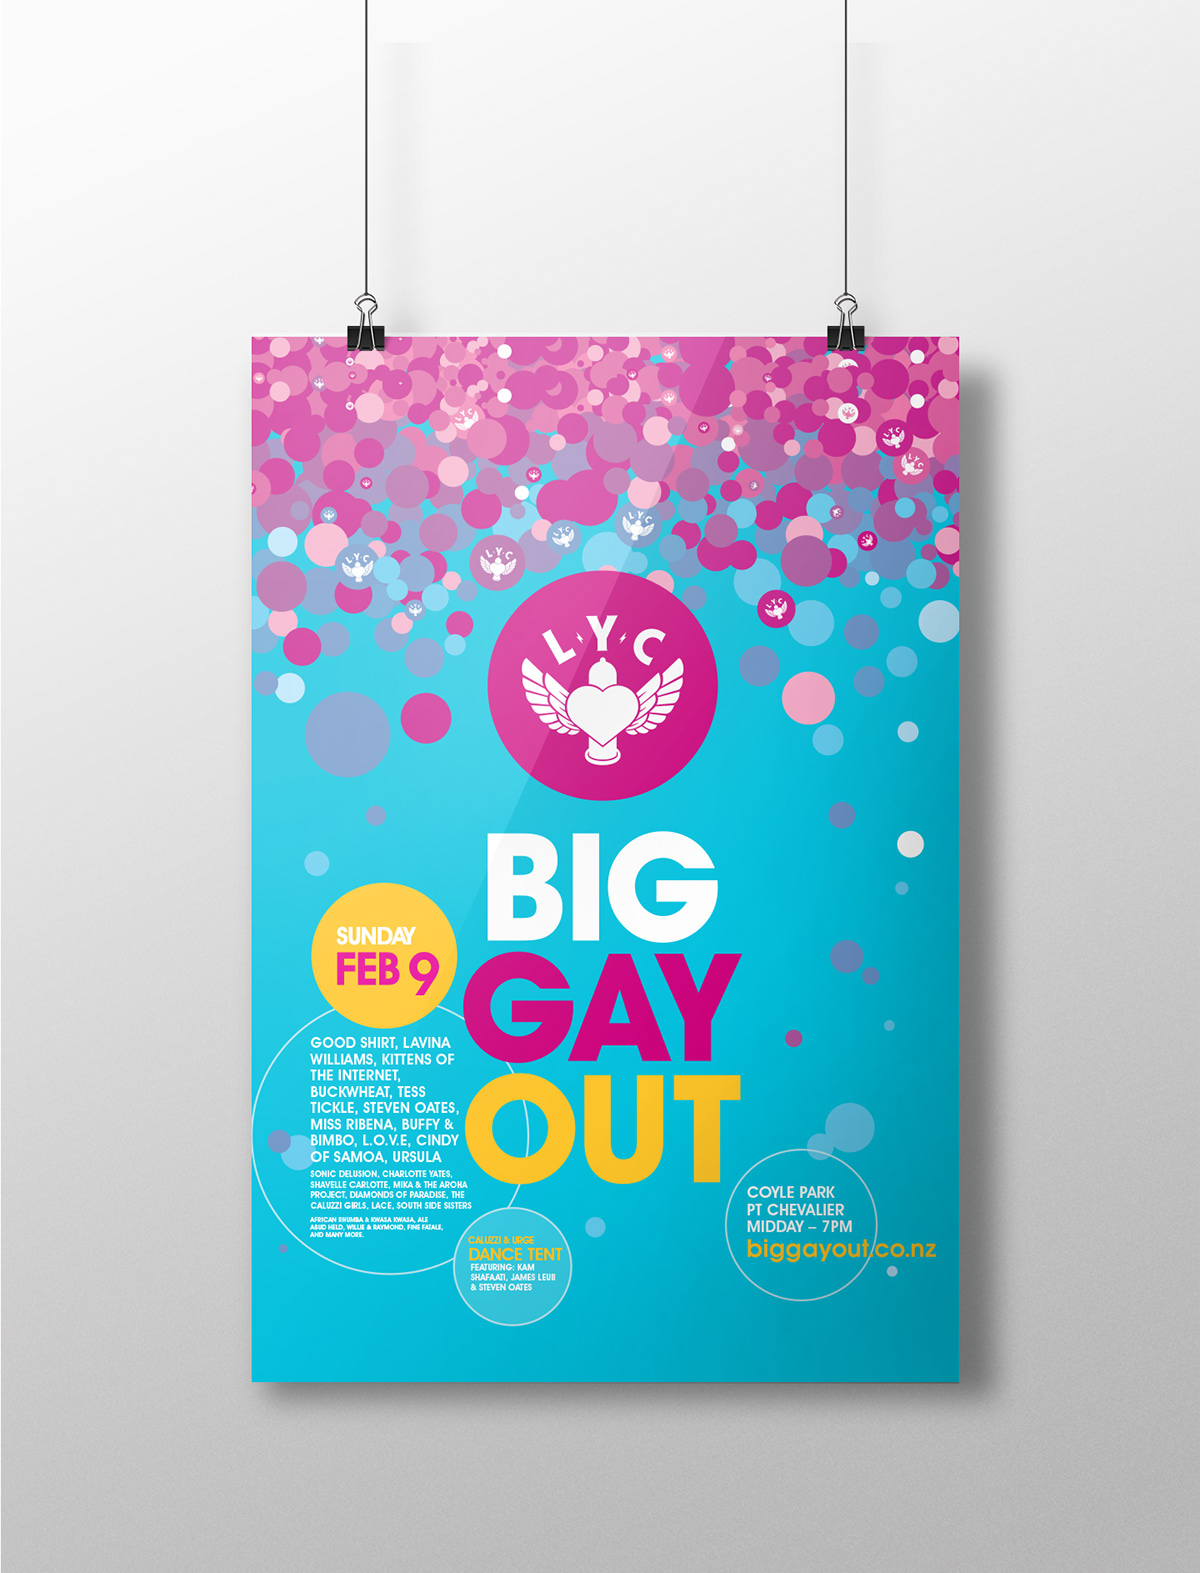 identity visual vector graphic Event festival gay LGBT pride bright fabulous New Zealand posters adshels Singlet